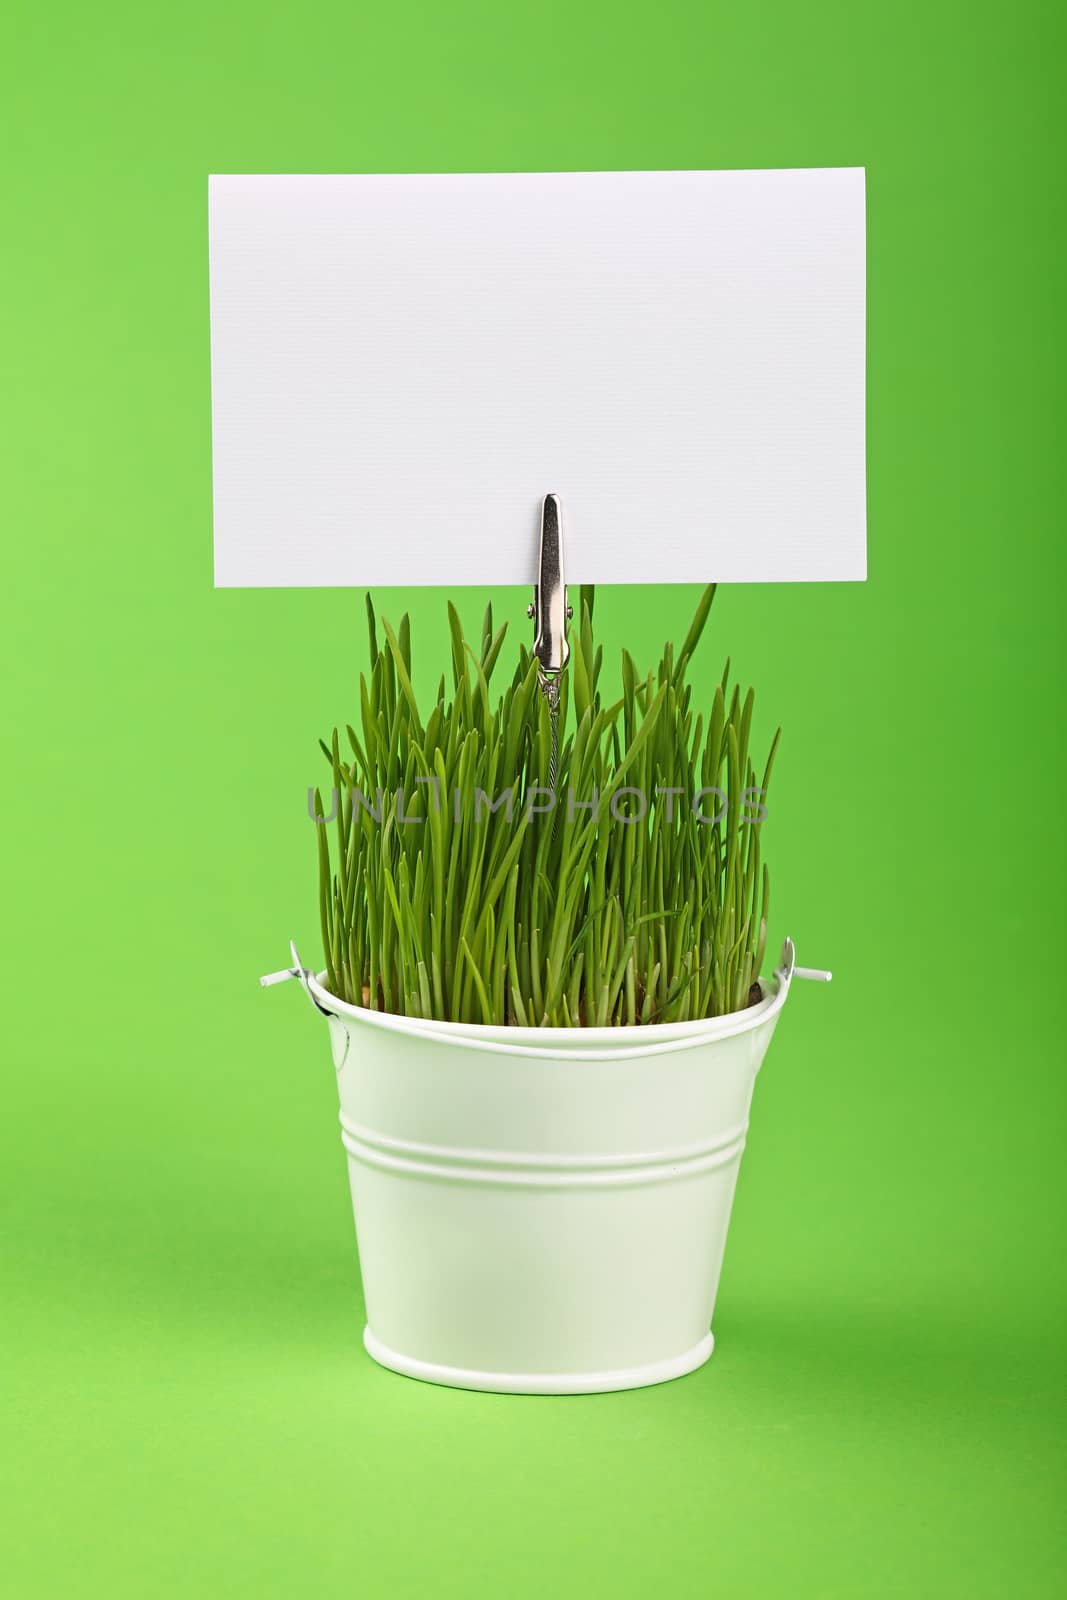 Fresh spring grass growing in small painted metal bucket with white paper sign copy space, close up over green paper background, low angle side view